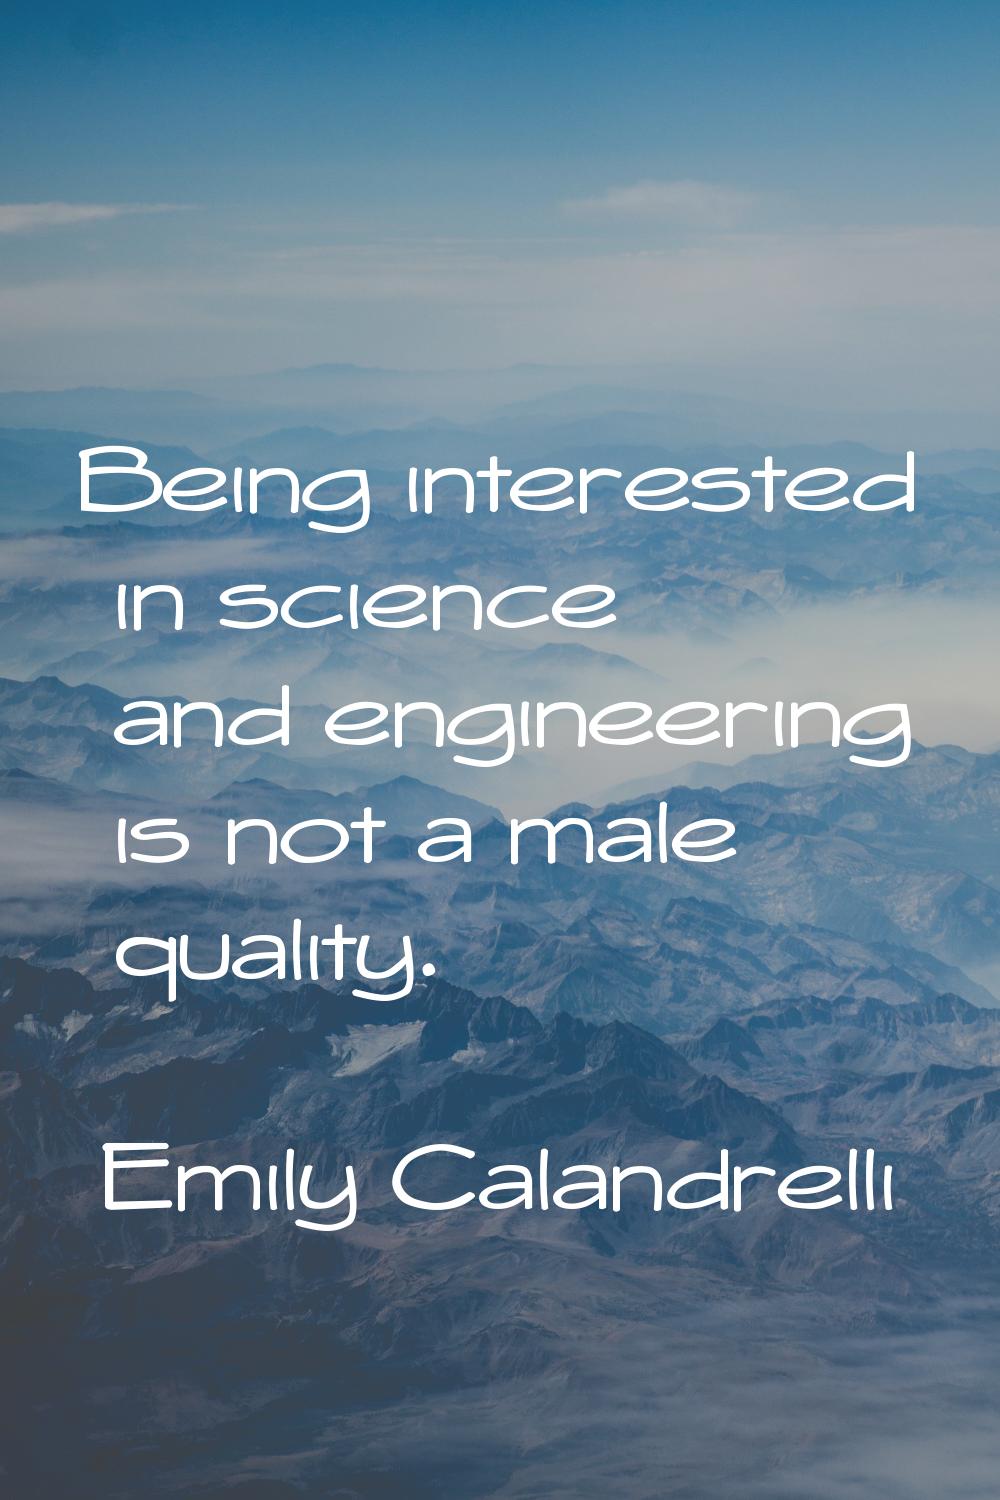 Being interested in science and engineering is not a male quality.